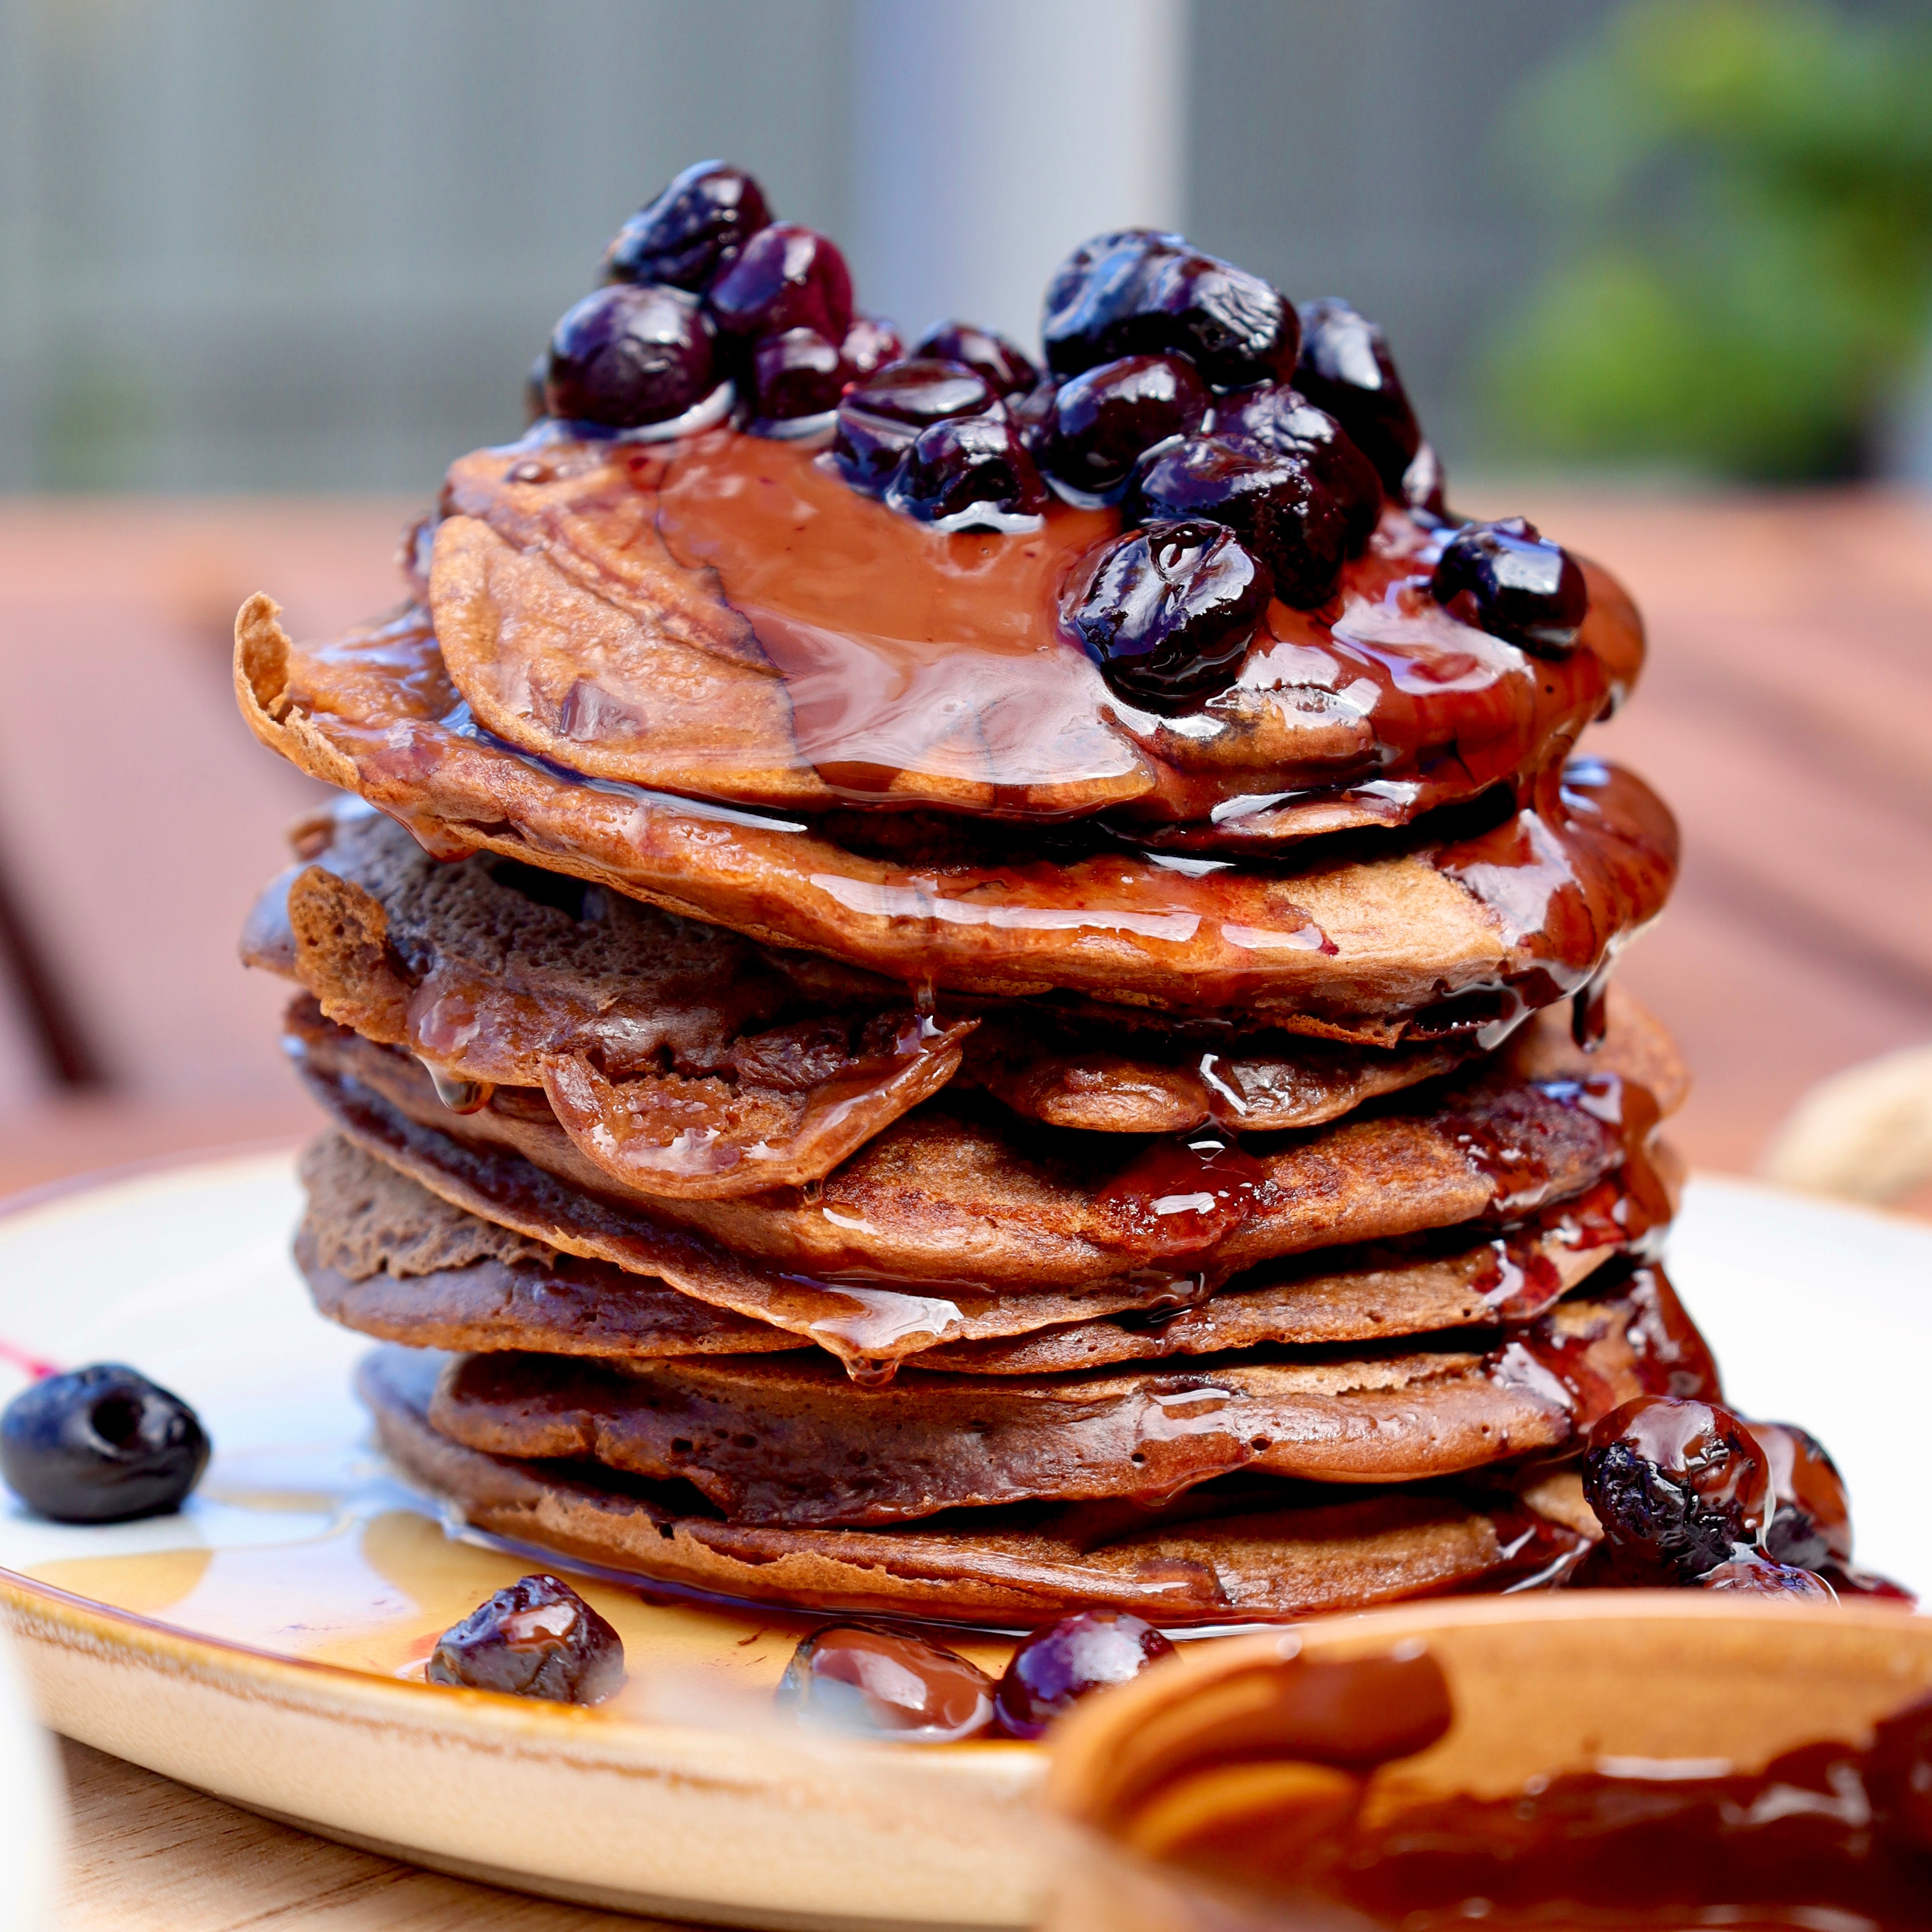 Fluffy chocolate protein pancakes topped with warm blueberry compote, drizzled with melted dark chocolate and maple syrup